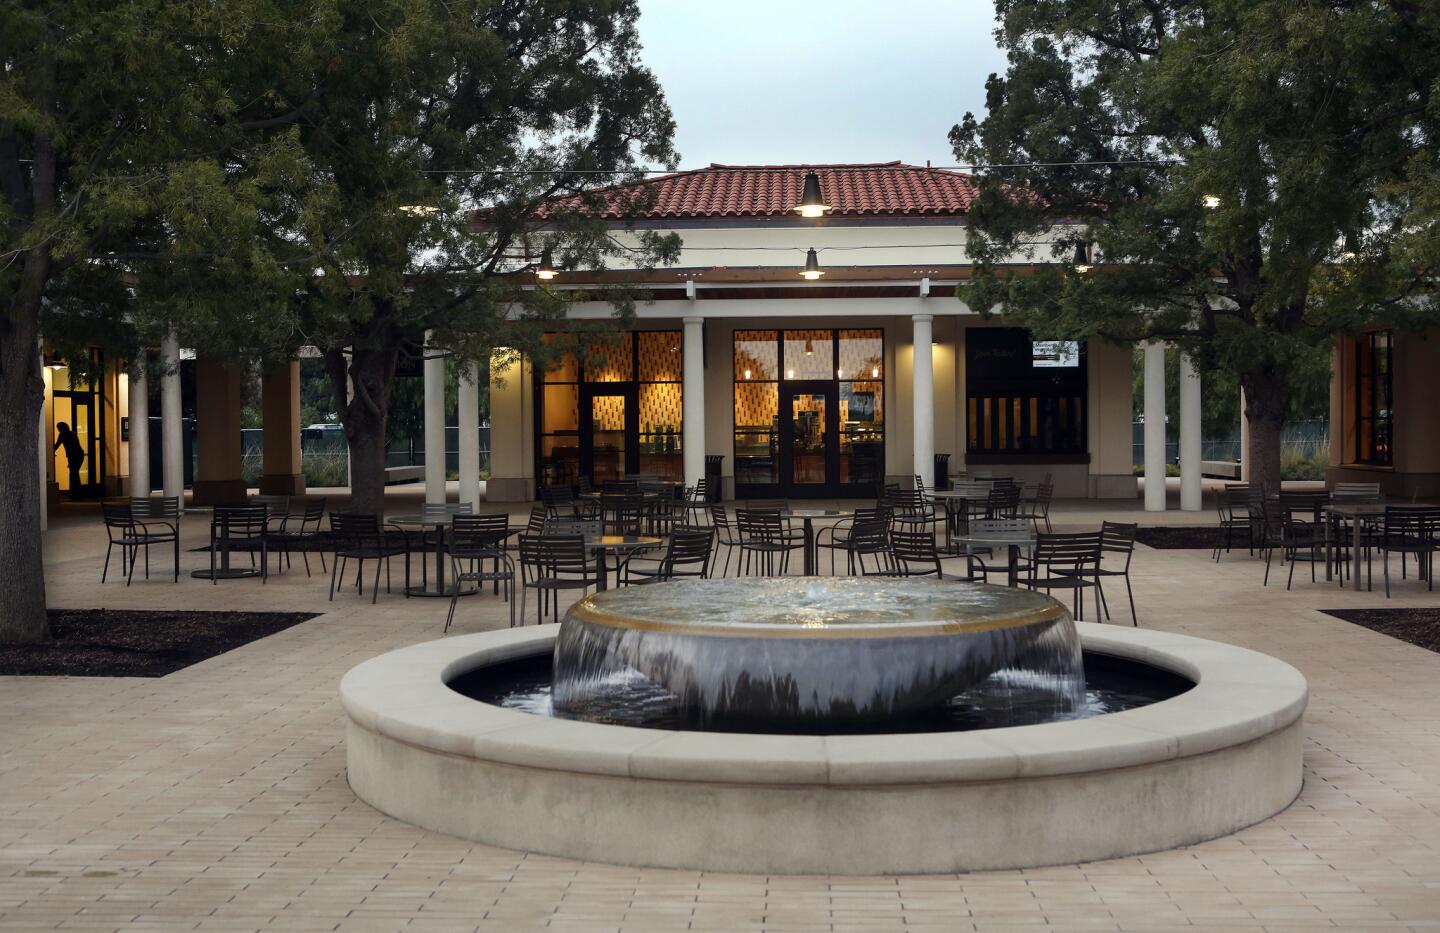 A look at the exterior of the Coffee Shop located inside the new Steven S. Koblik Education and Visitor Center at the Huntington Library in San Marino.